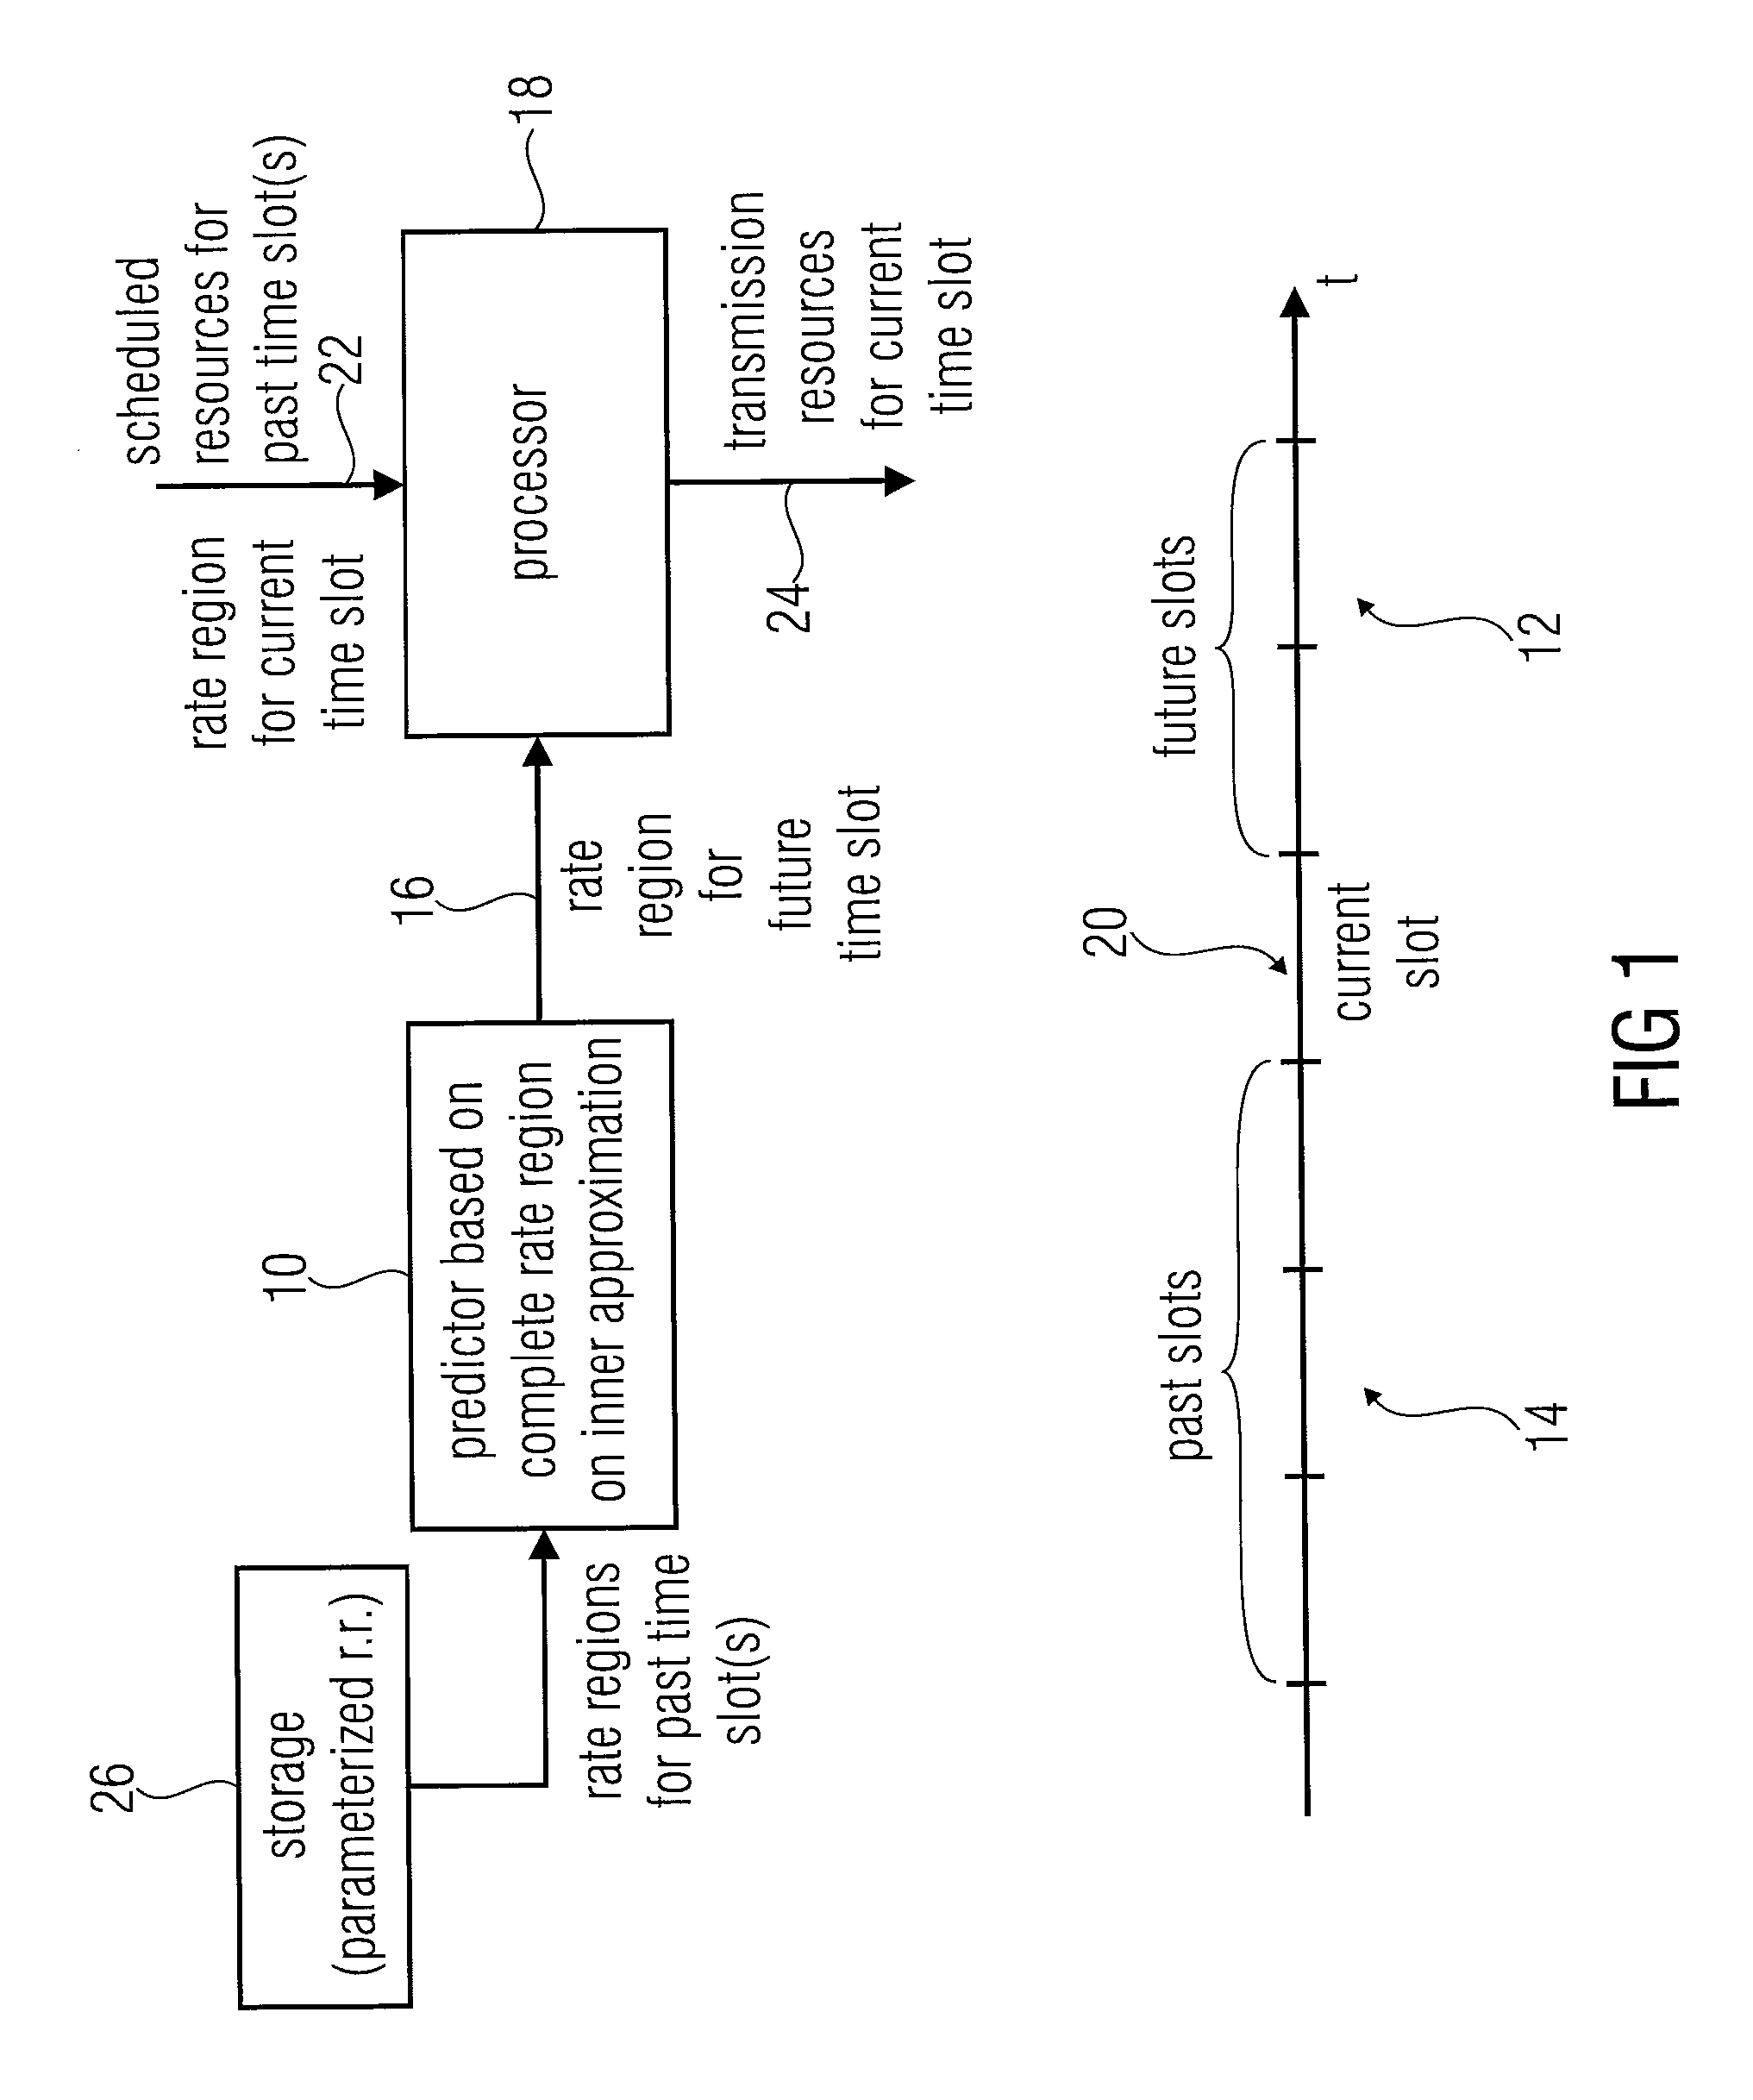 Apparatus and method for scheduling transmission resources to users served by a base station using a prediction of rate regions